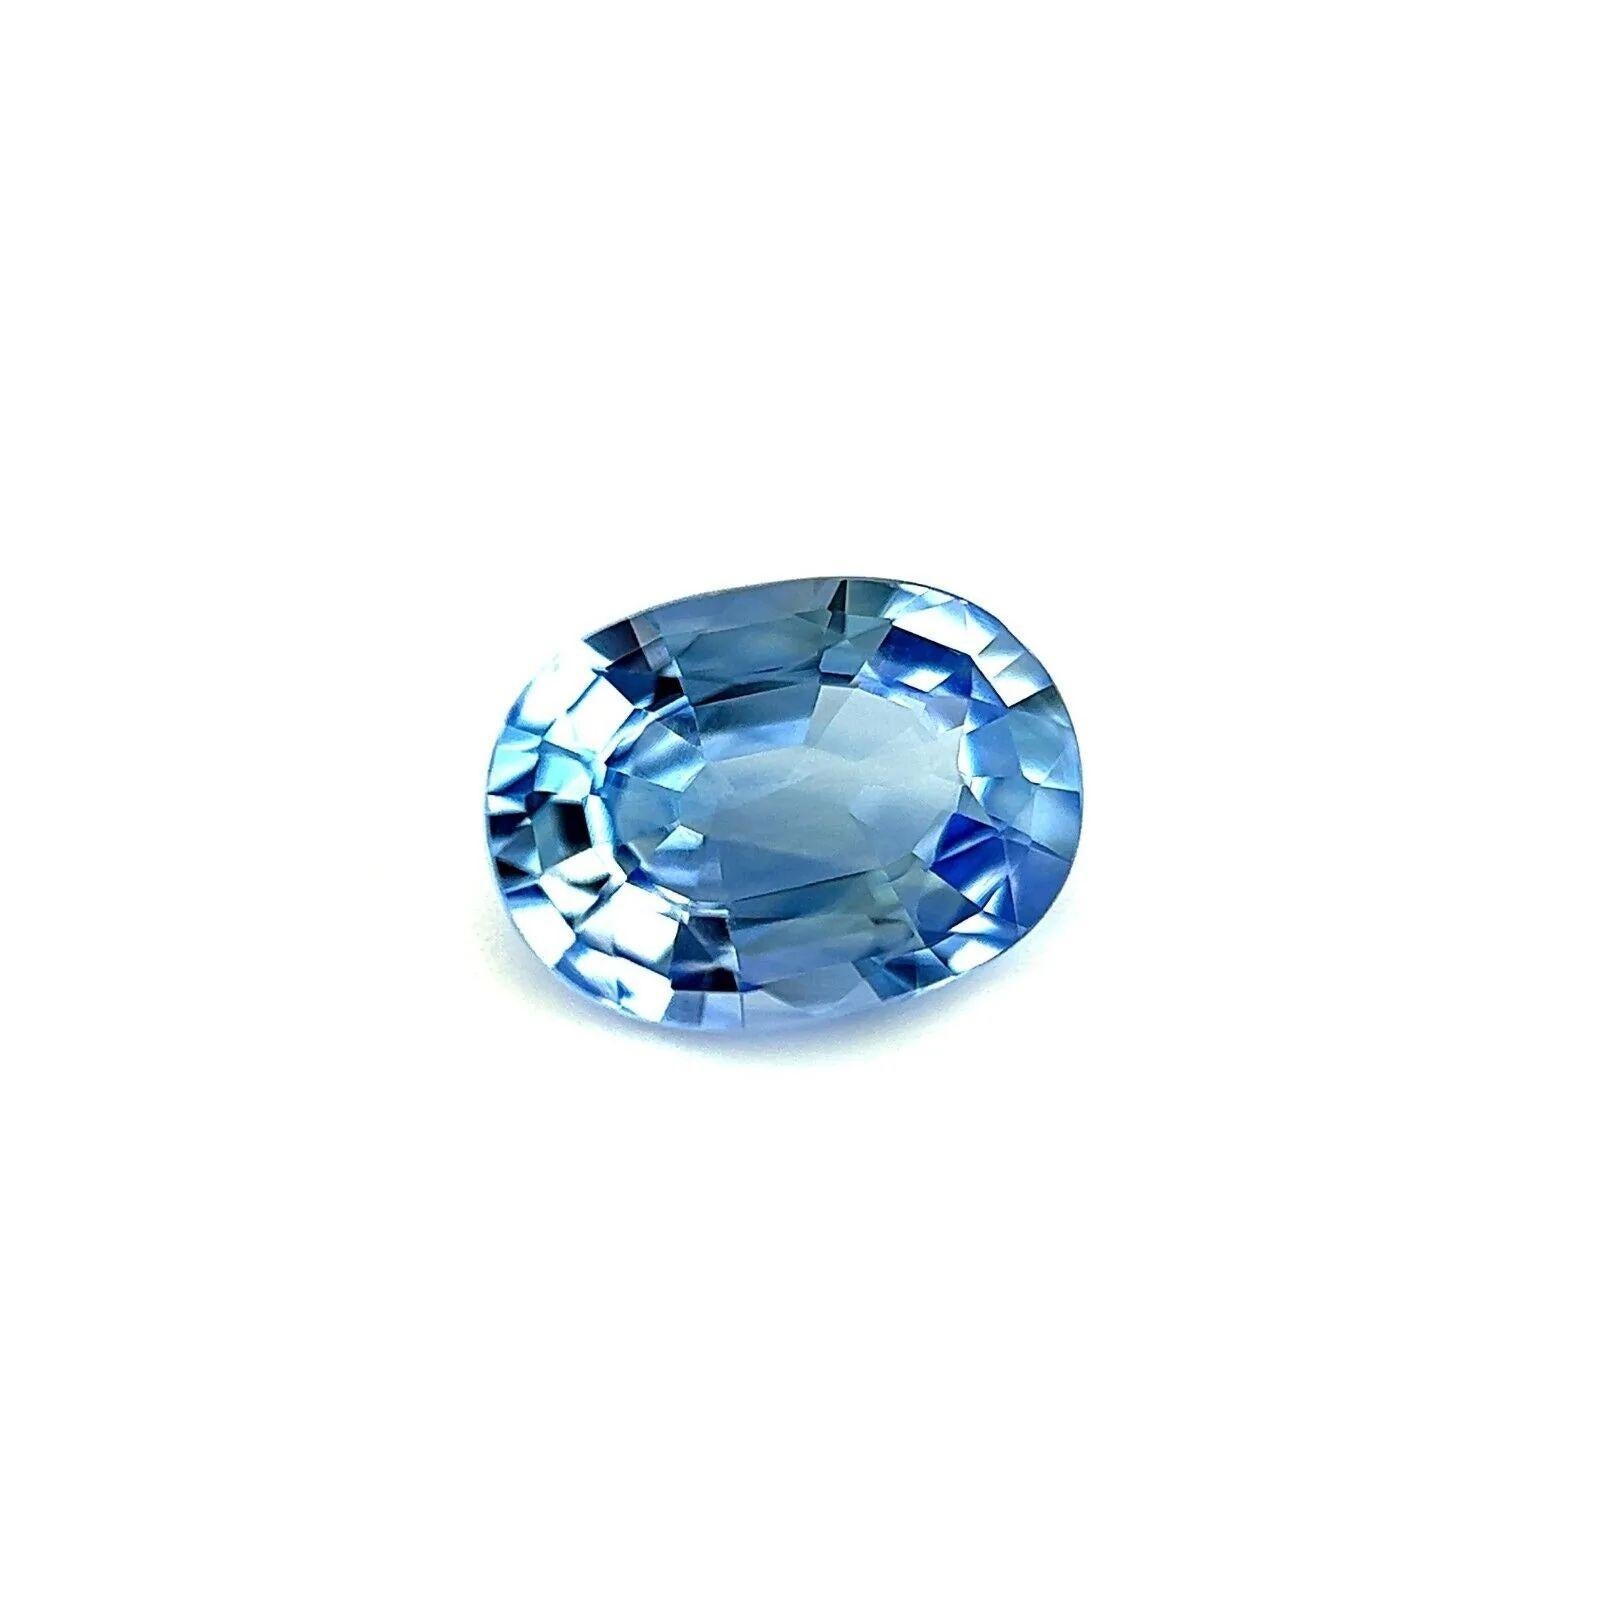 1.12ct Fine Ceylon Blue Sapphire 7.4x5.4mm Sri Lankan Oval Cut Loose Gem VS

Natural Ceylon Blue Sapphire Gemstone.
1.12 Carat sapphire with a beautiful vivid blue colour.
This sapphire has very good clarity, a very clean stone with only some small